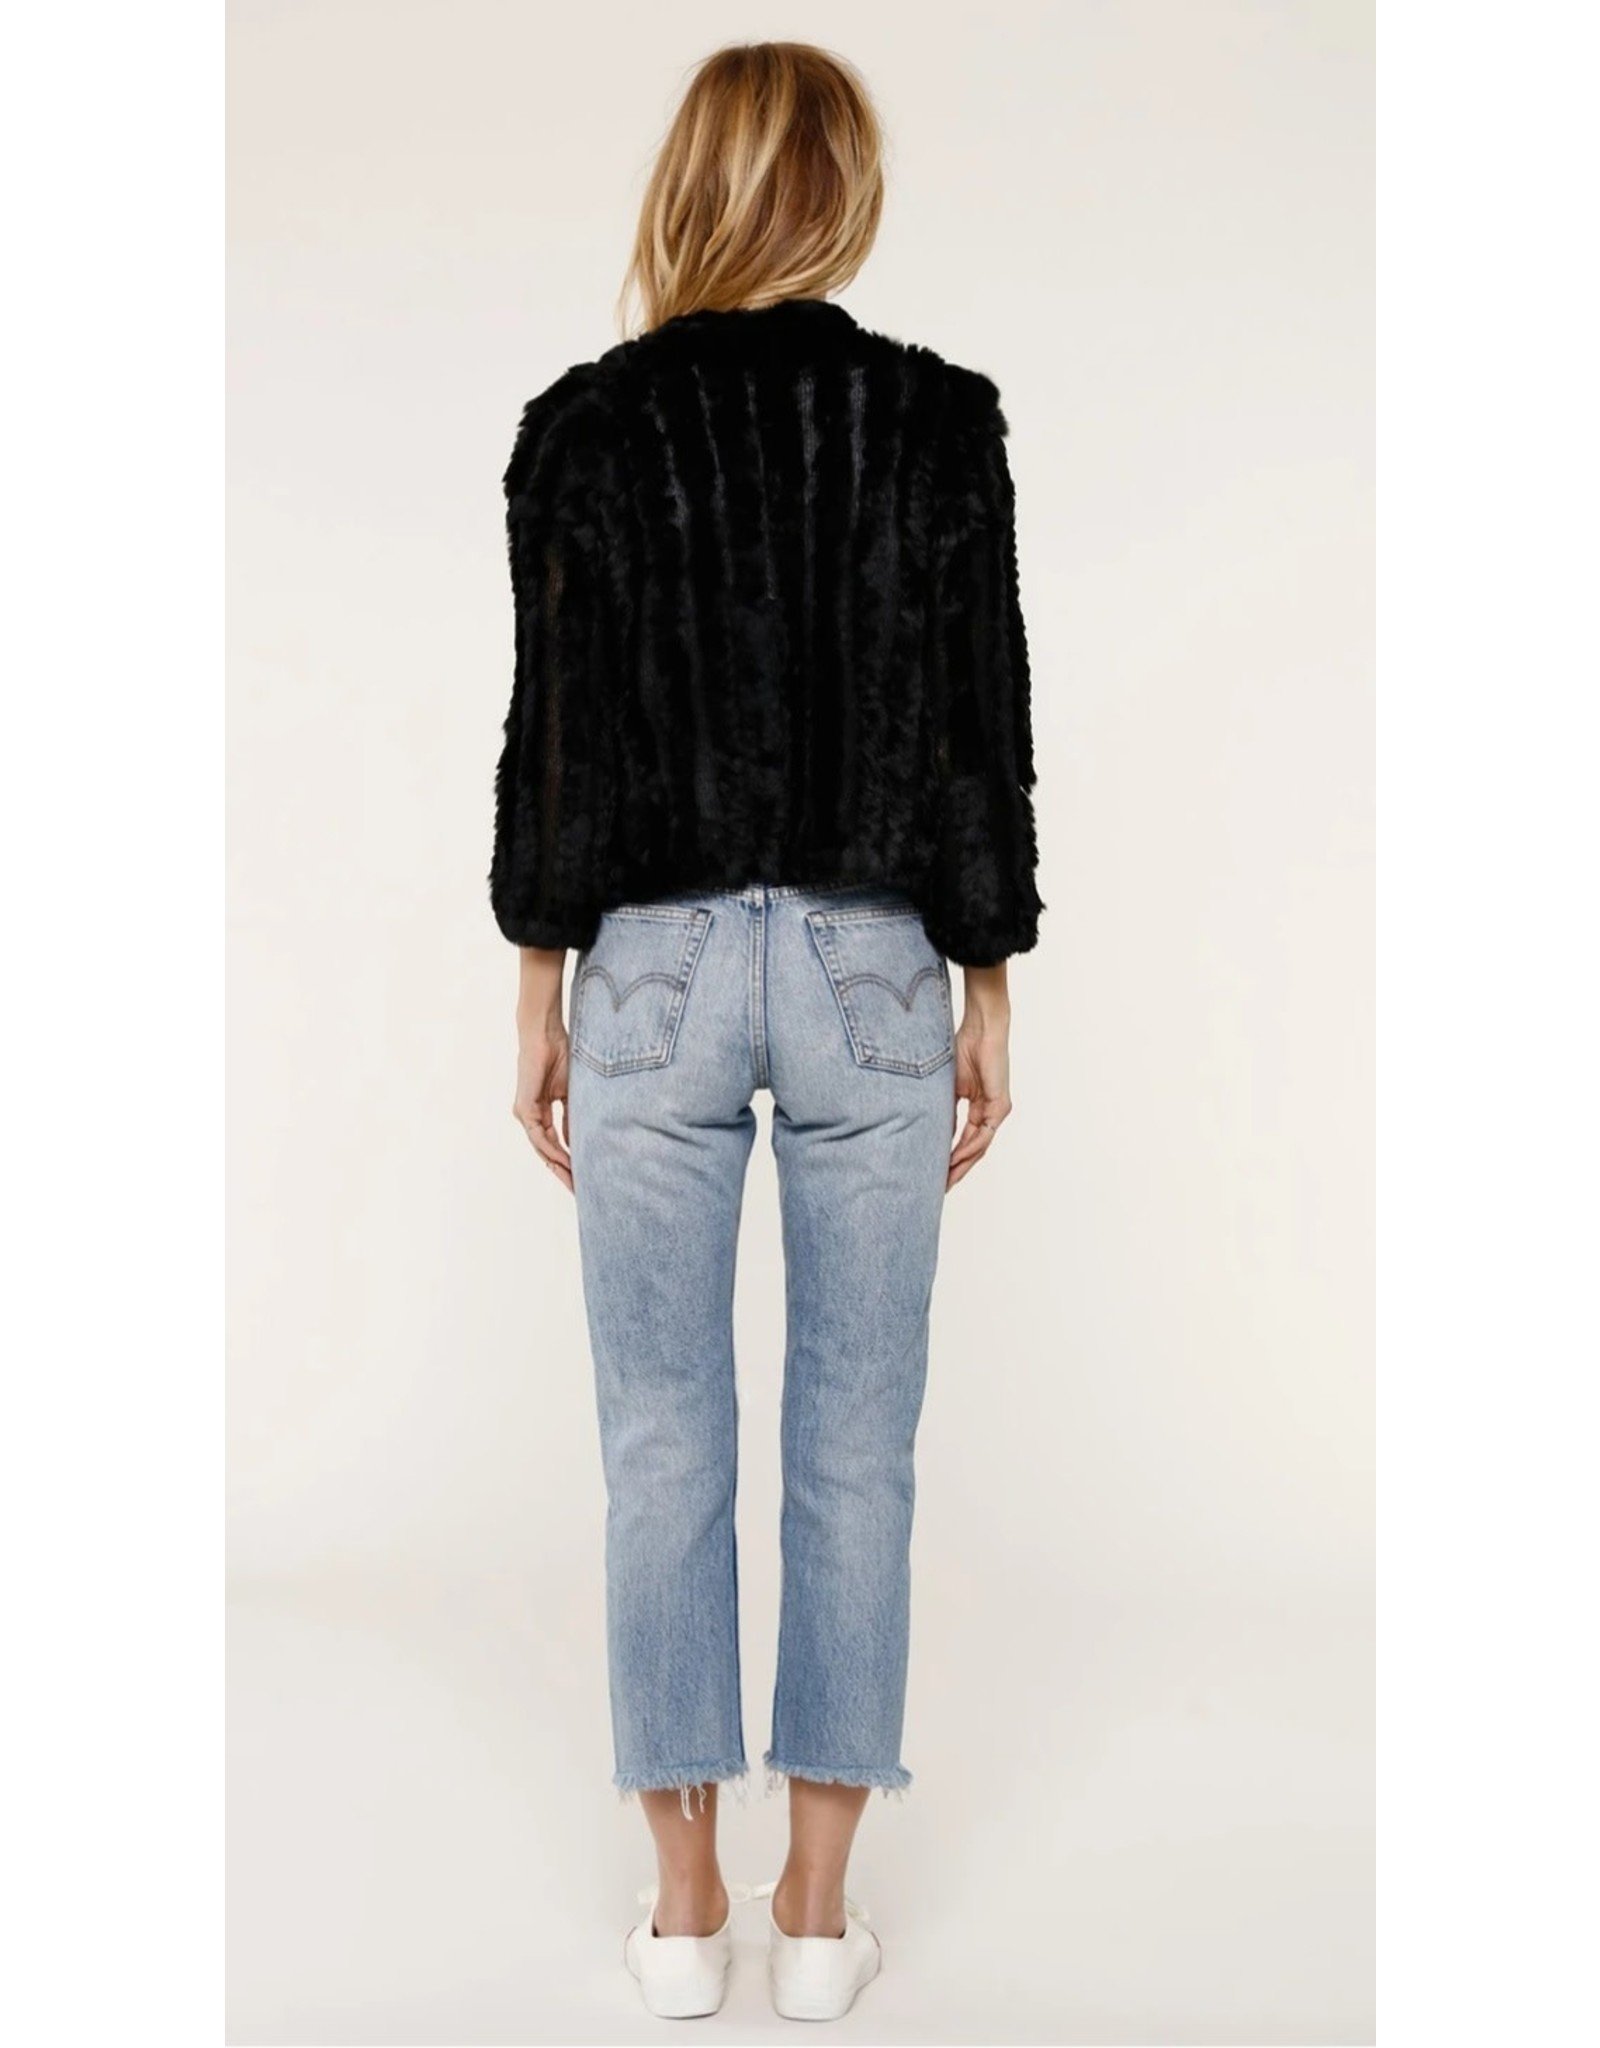 THE LUXE FUR JACKET